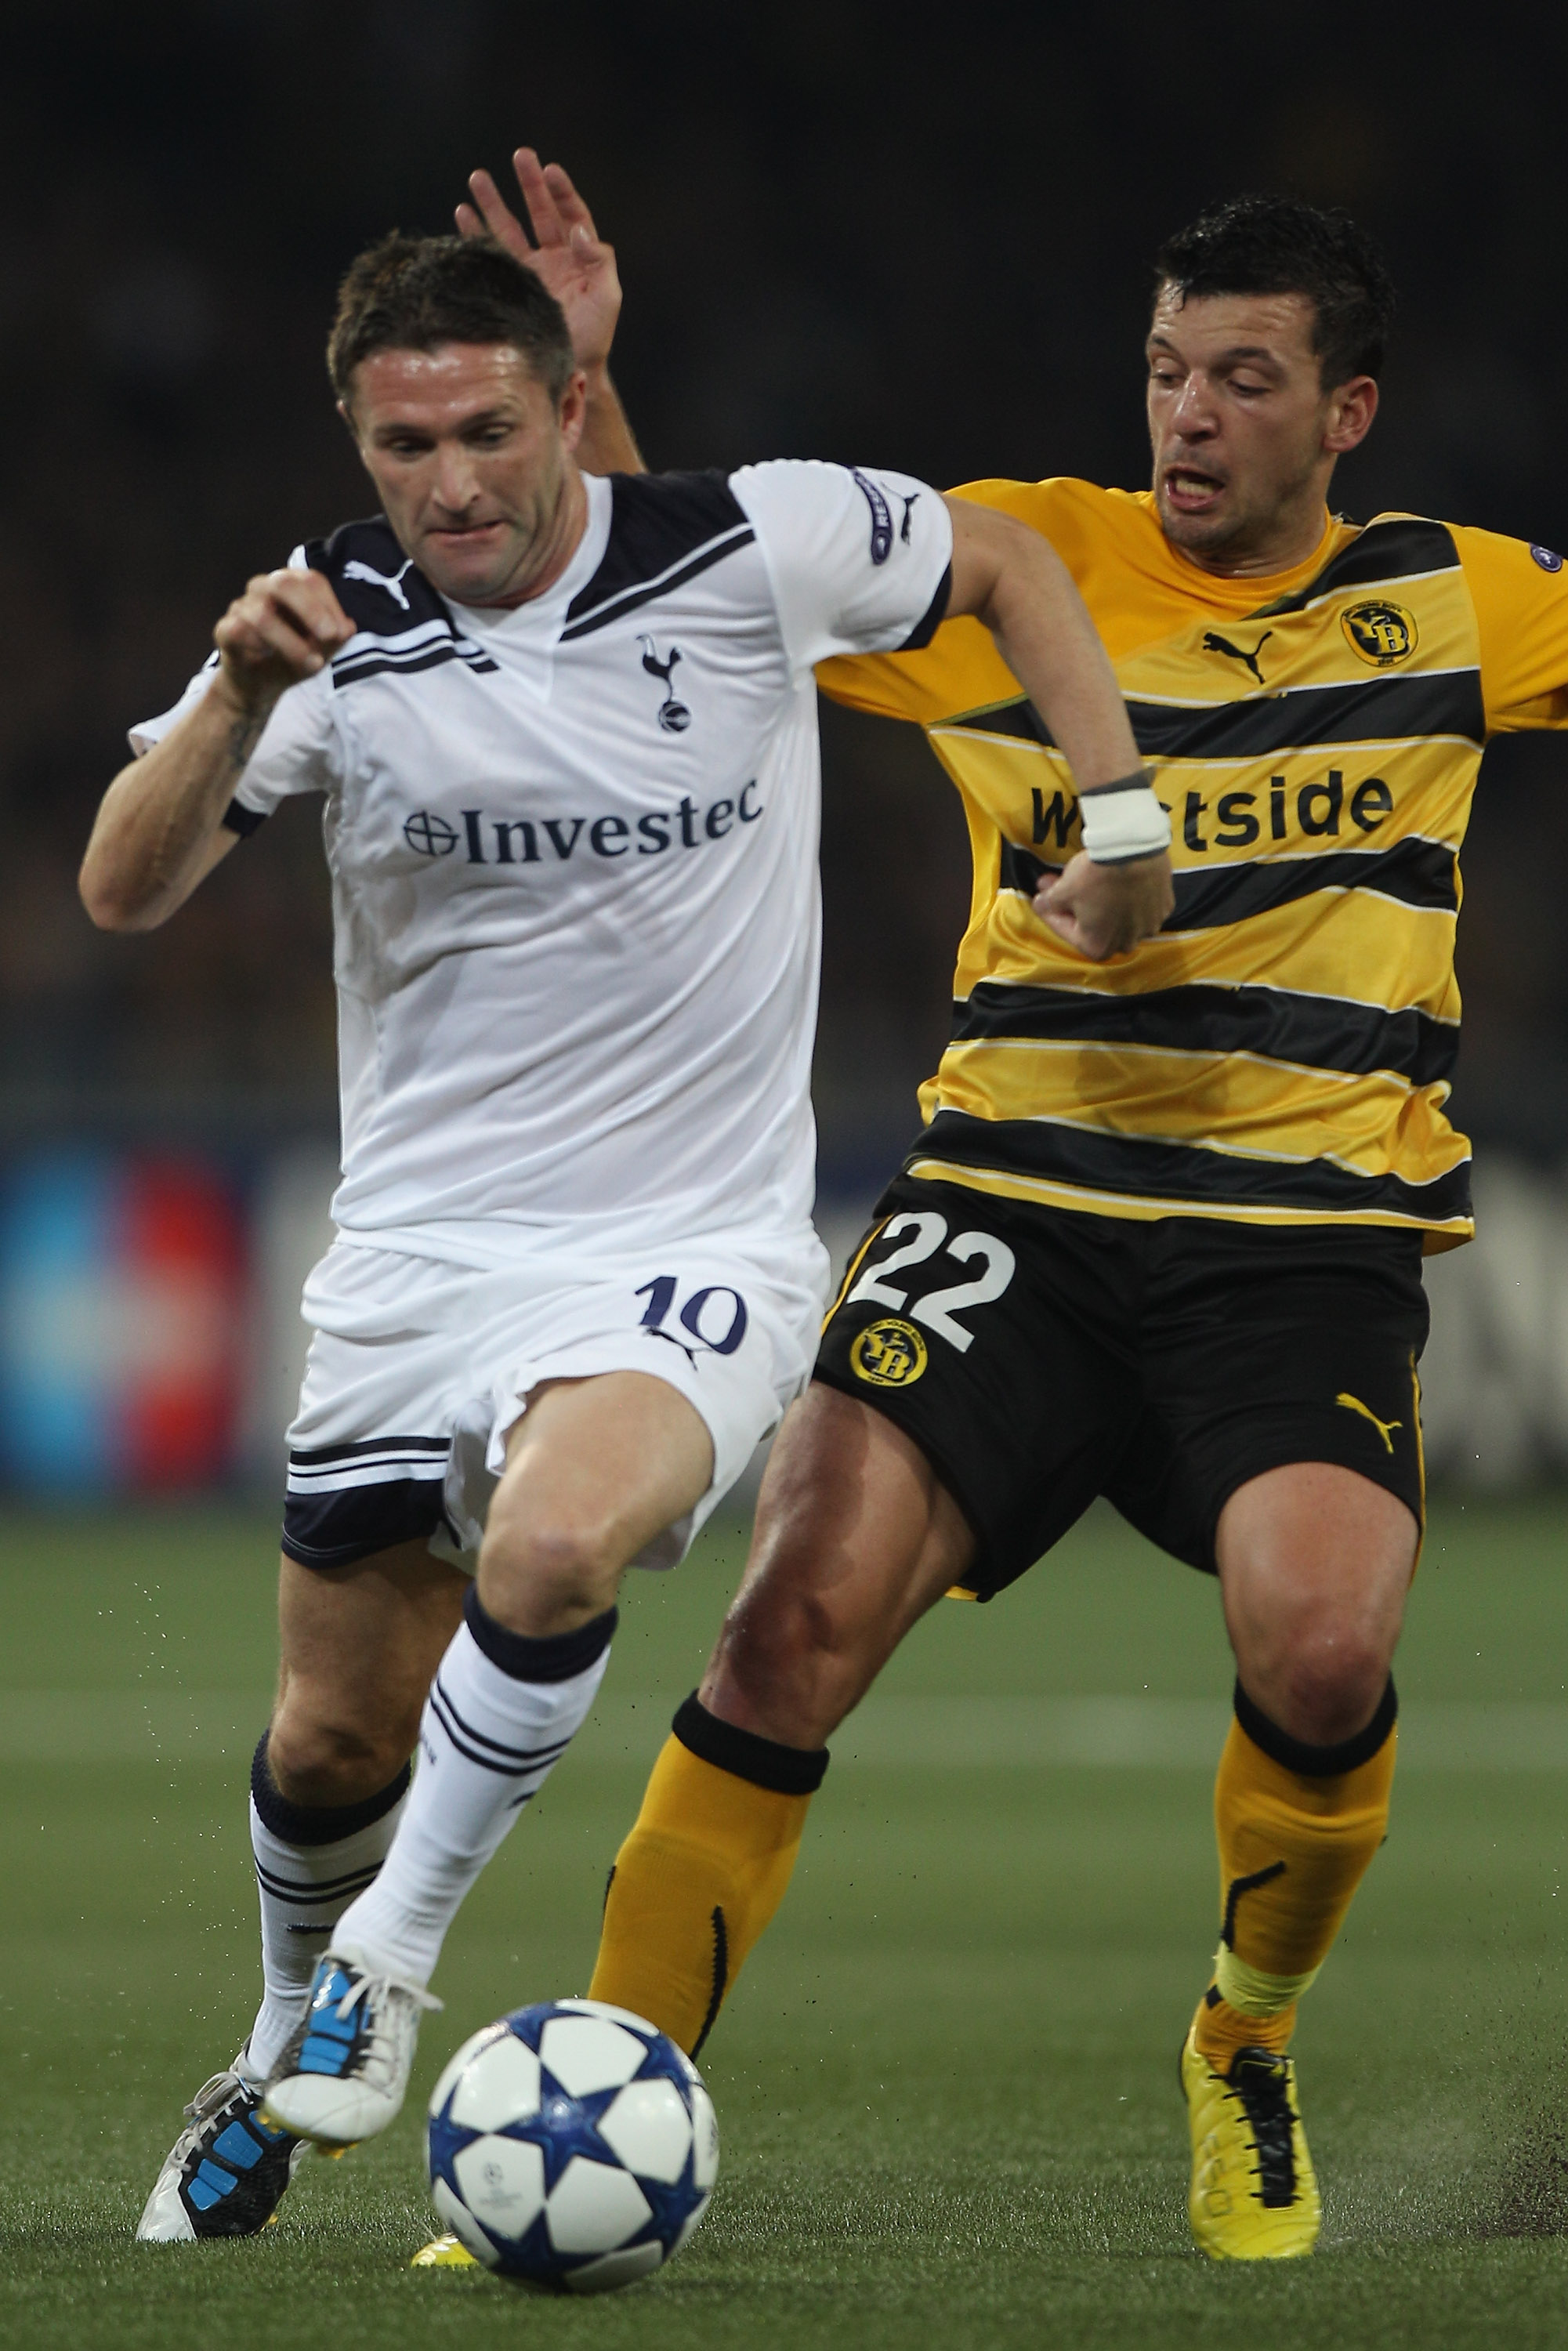 BERNE, SWITZERLAND - AUGUST 17:  Robbie Keane (l) of Tottenham takes on Xavier Hochstrasser during the UEFA Champions League Play-Off first leg match between BSC Young Boys and Tottenham Hotspur at the Stade de Suisse on August 17, 2010 in Berne, Switzerl